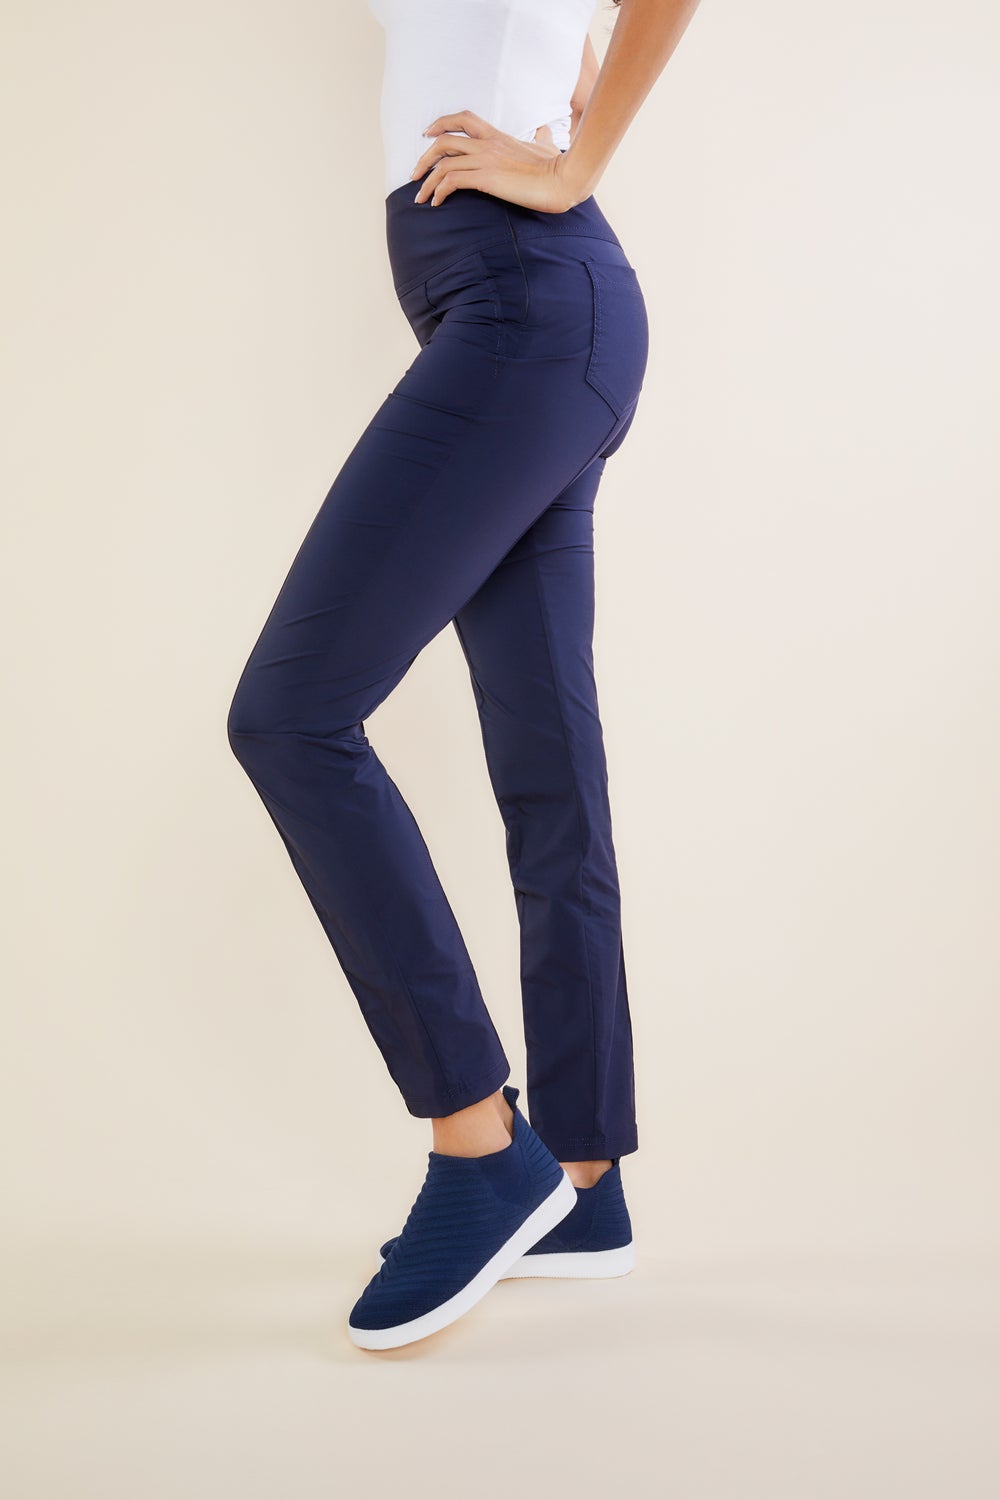 Anatomie Sonia High Rise Pant in Navy